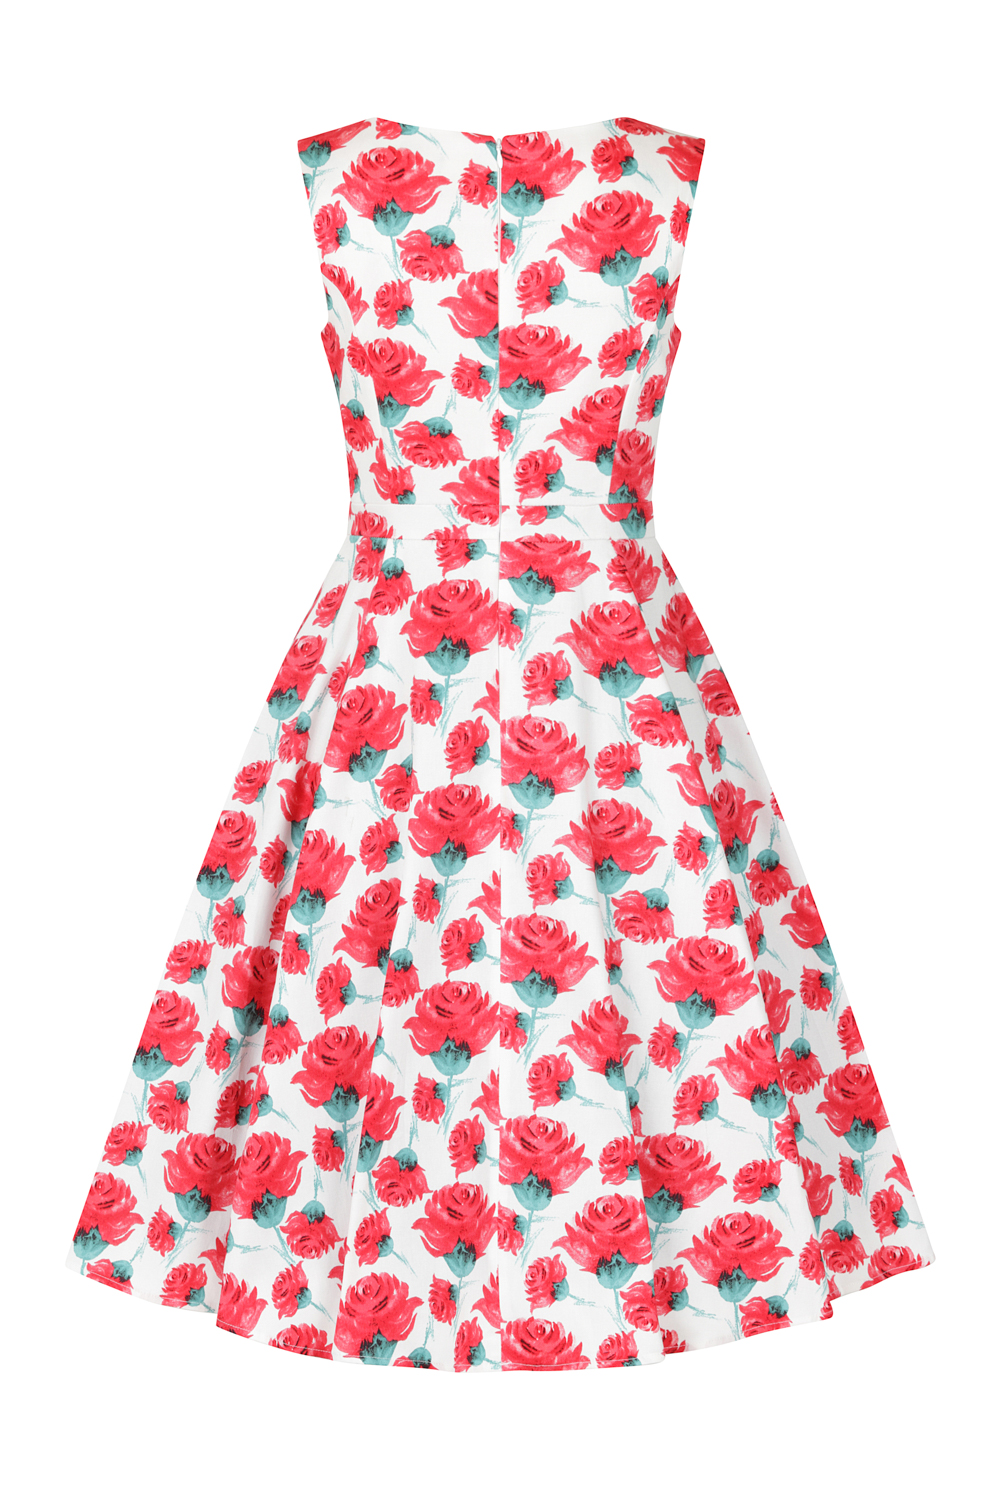 Rosemary Swing Dress in White/Red - Hearts & Roses London